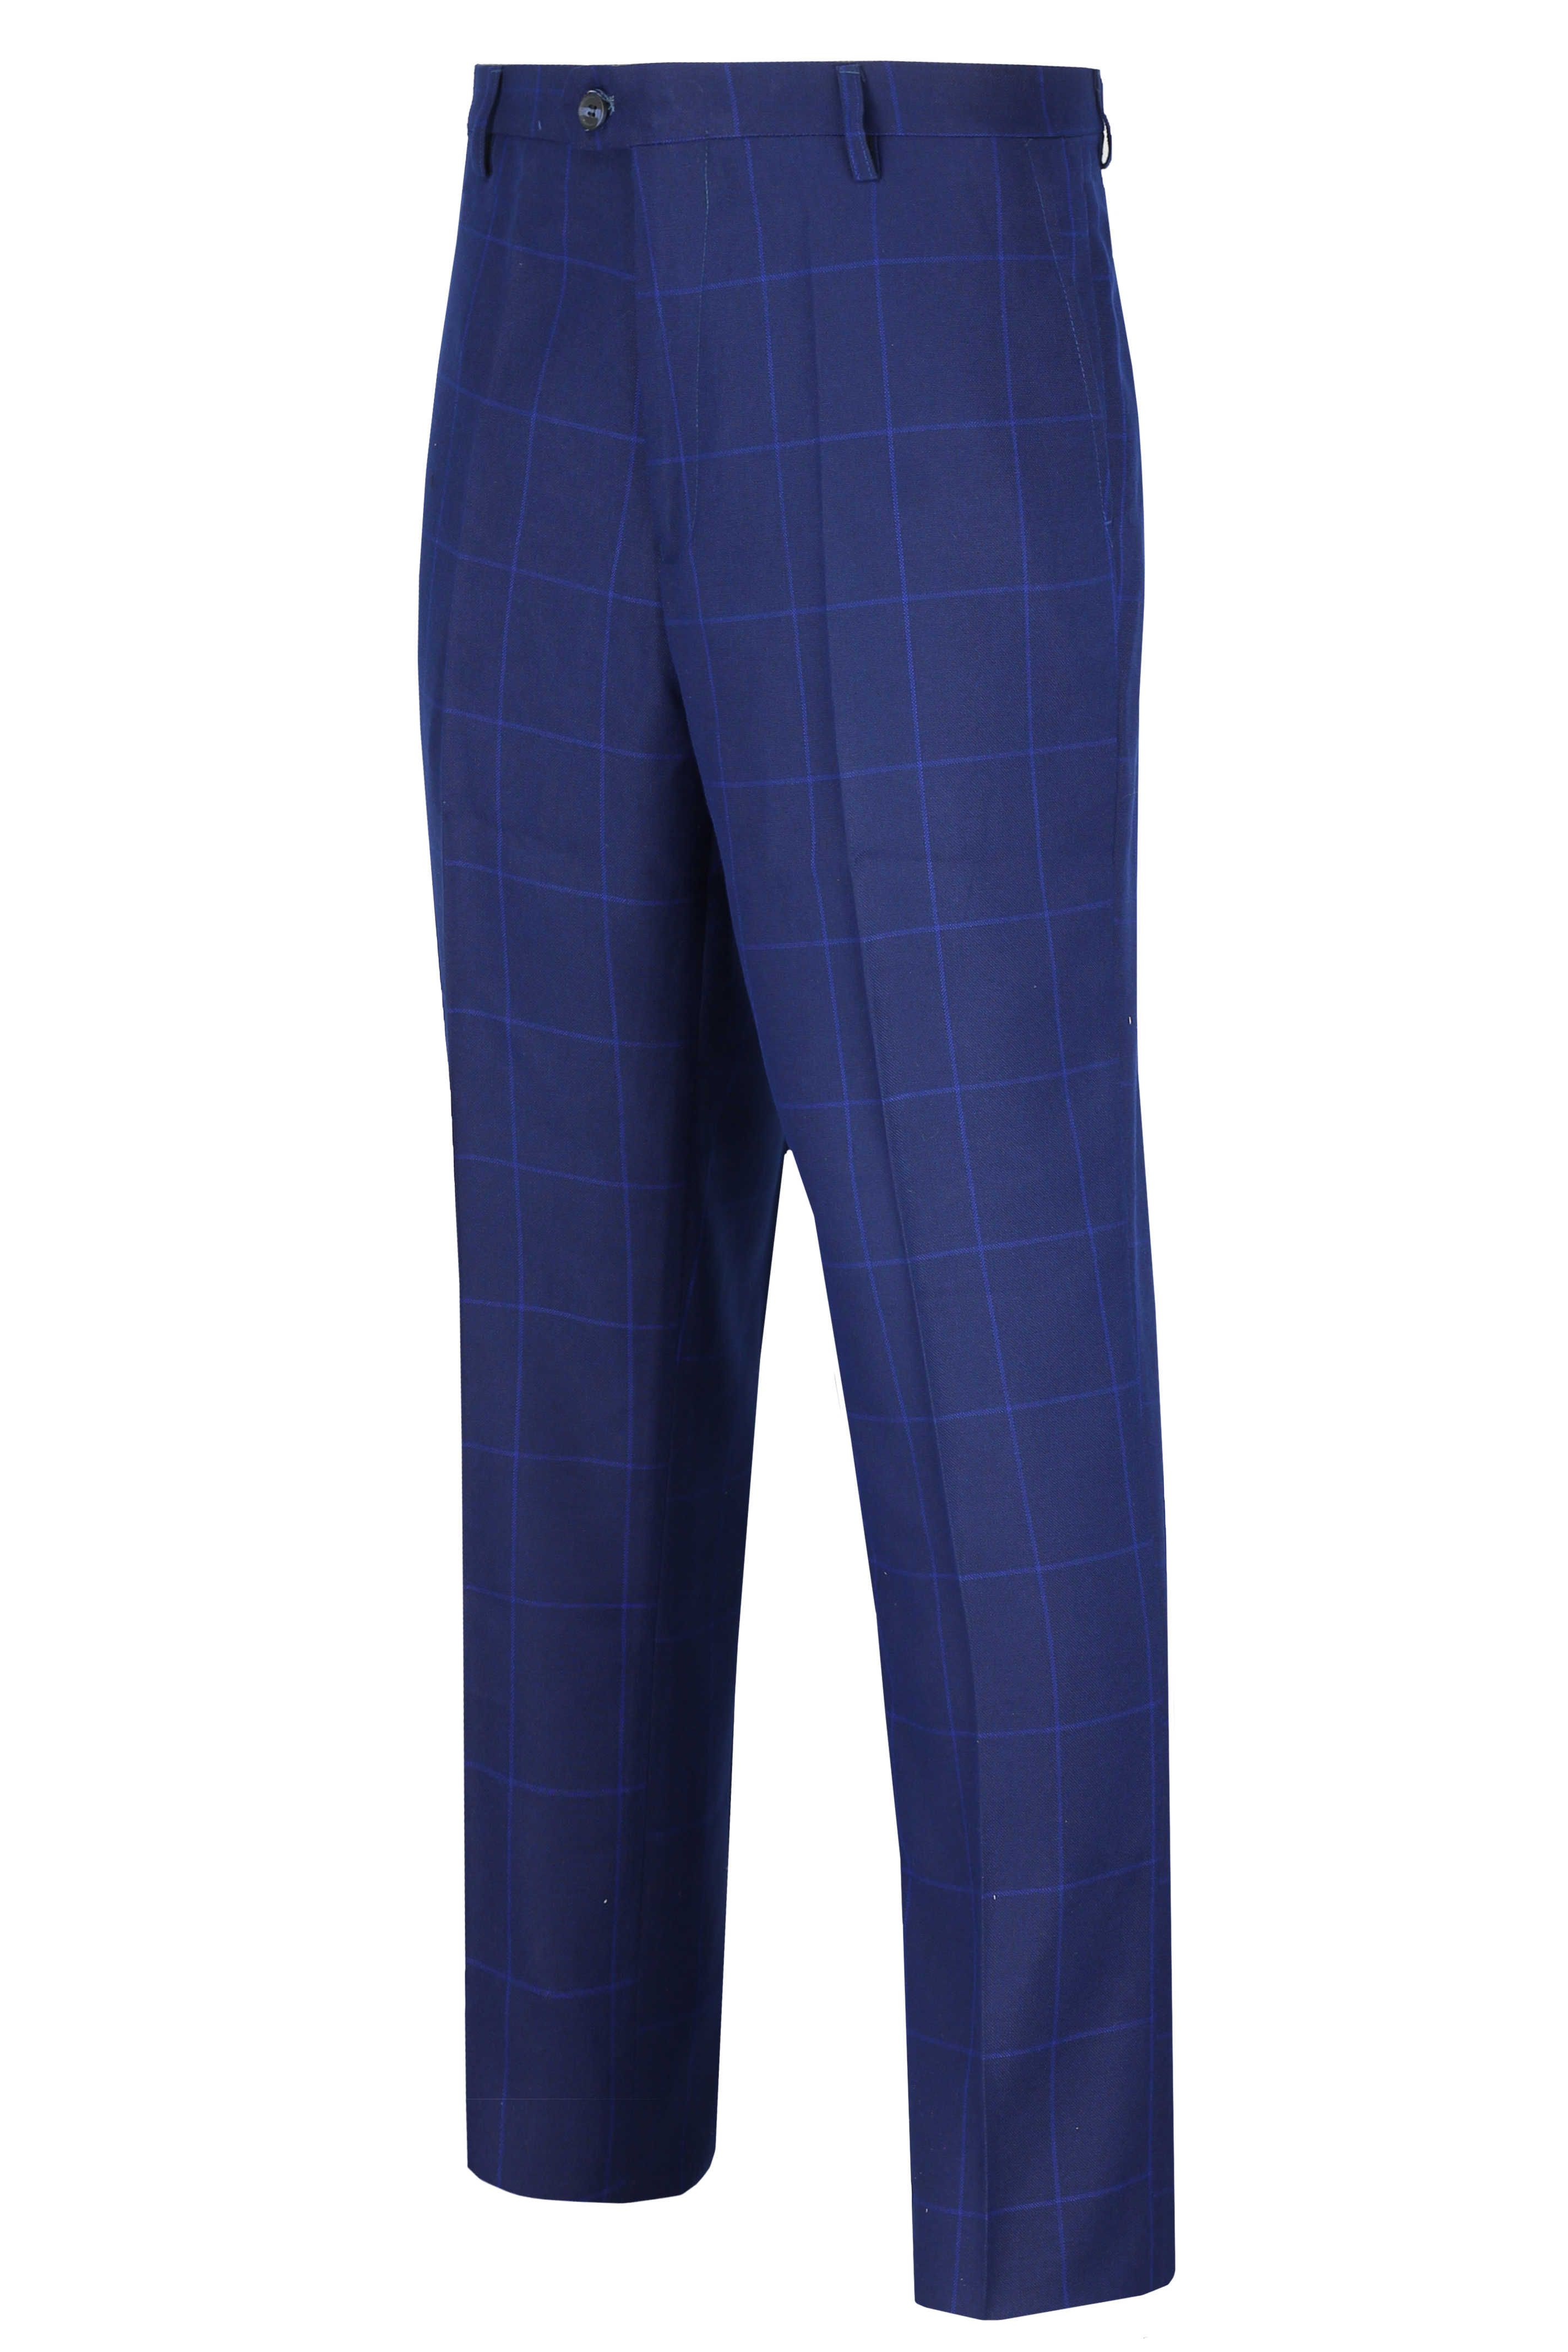 TAILORED CHECKS  Mens outfits, Mens clothing styles, Pants